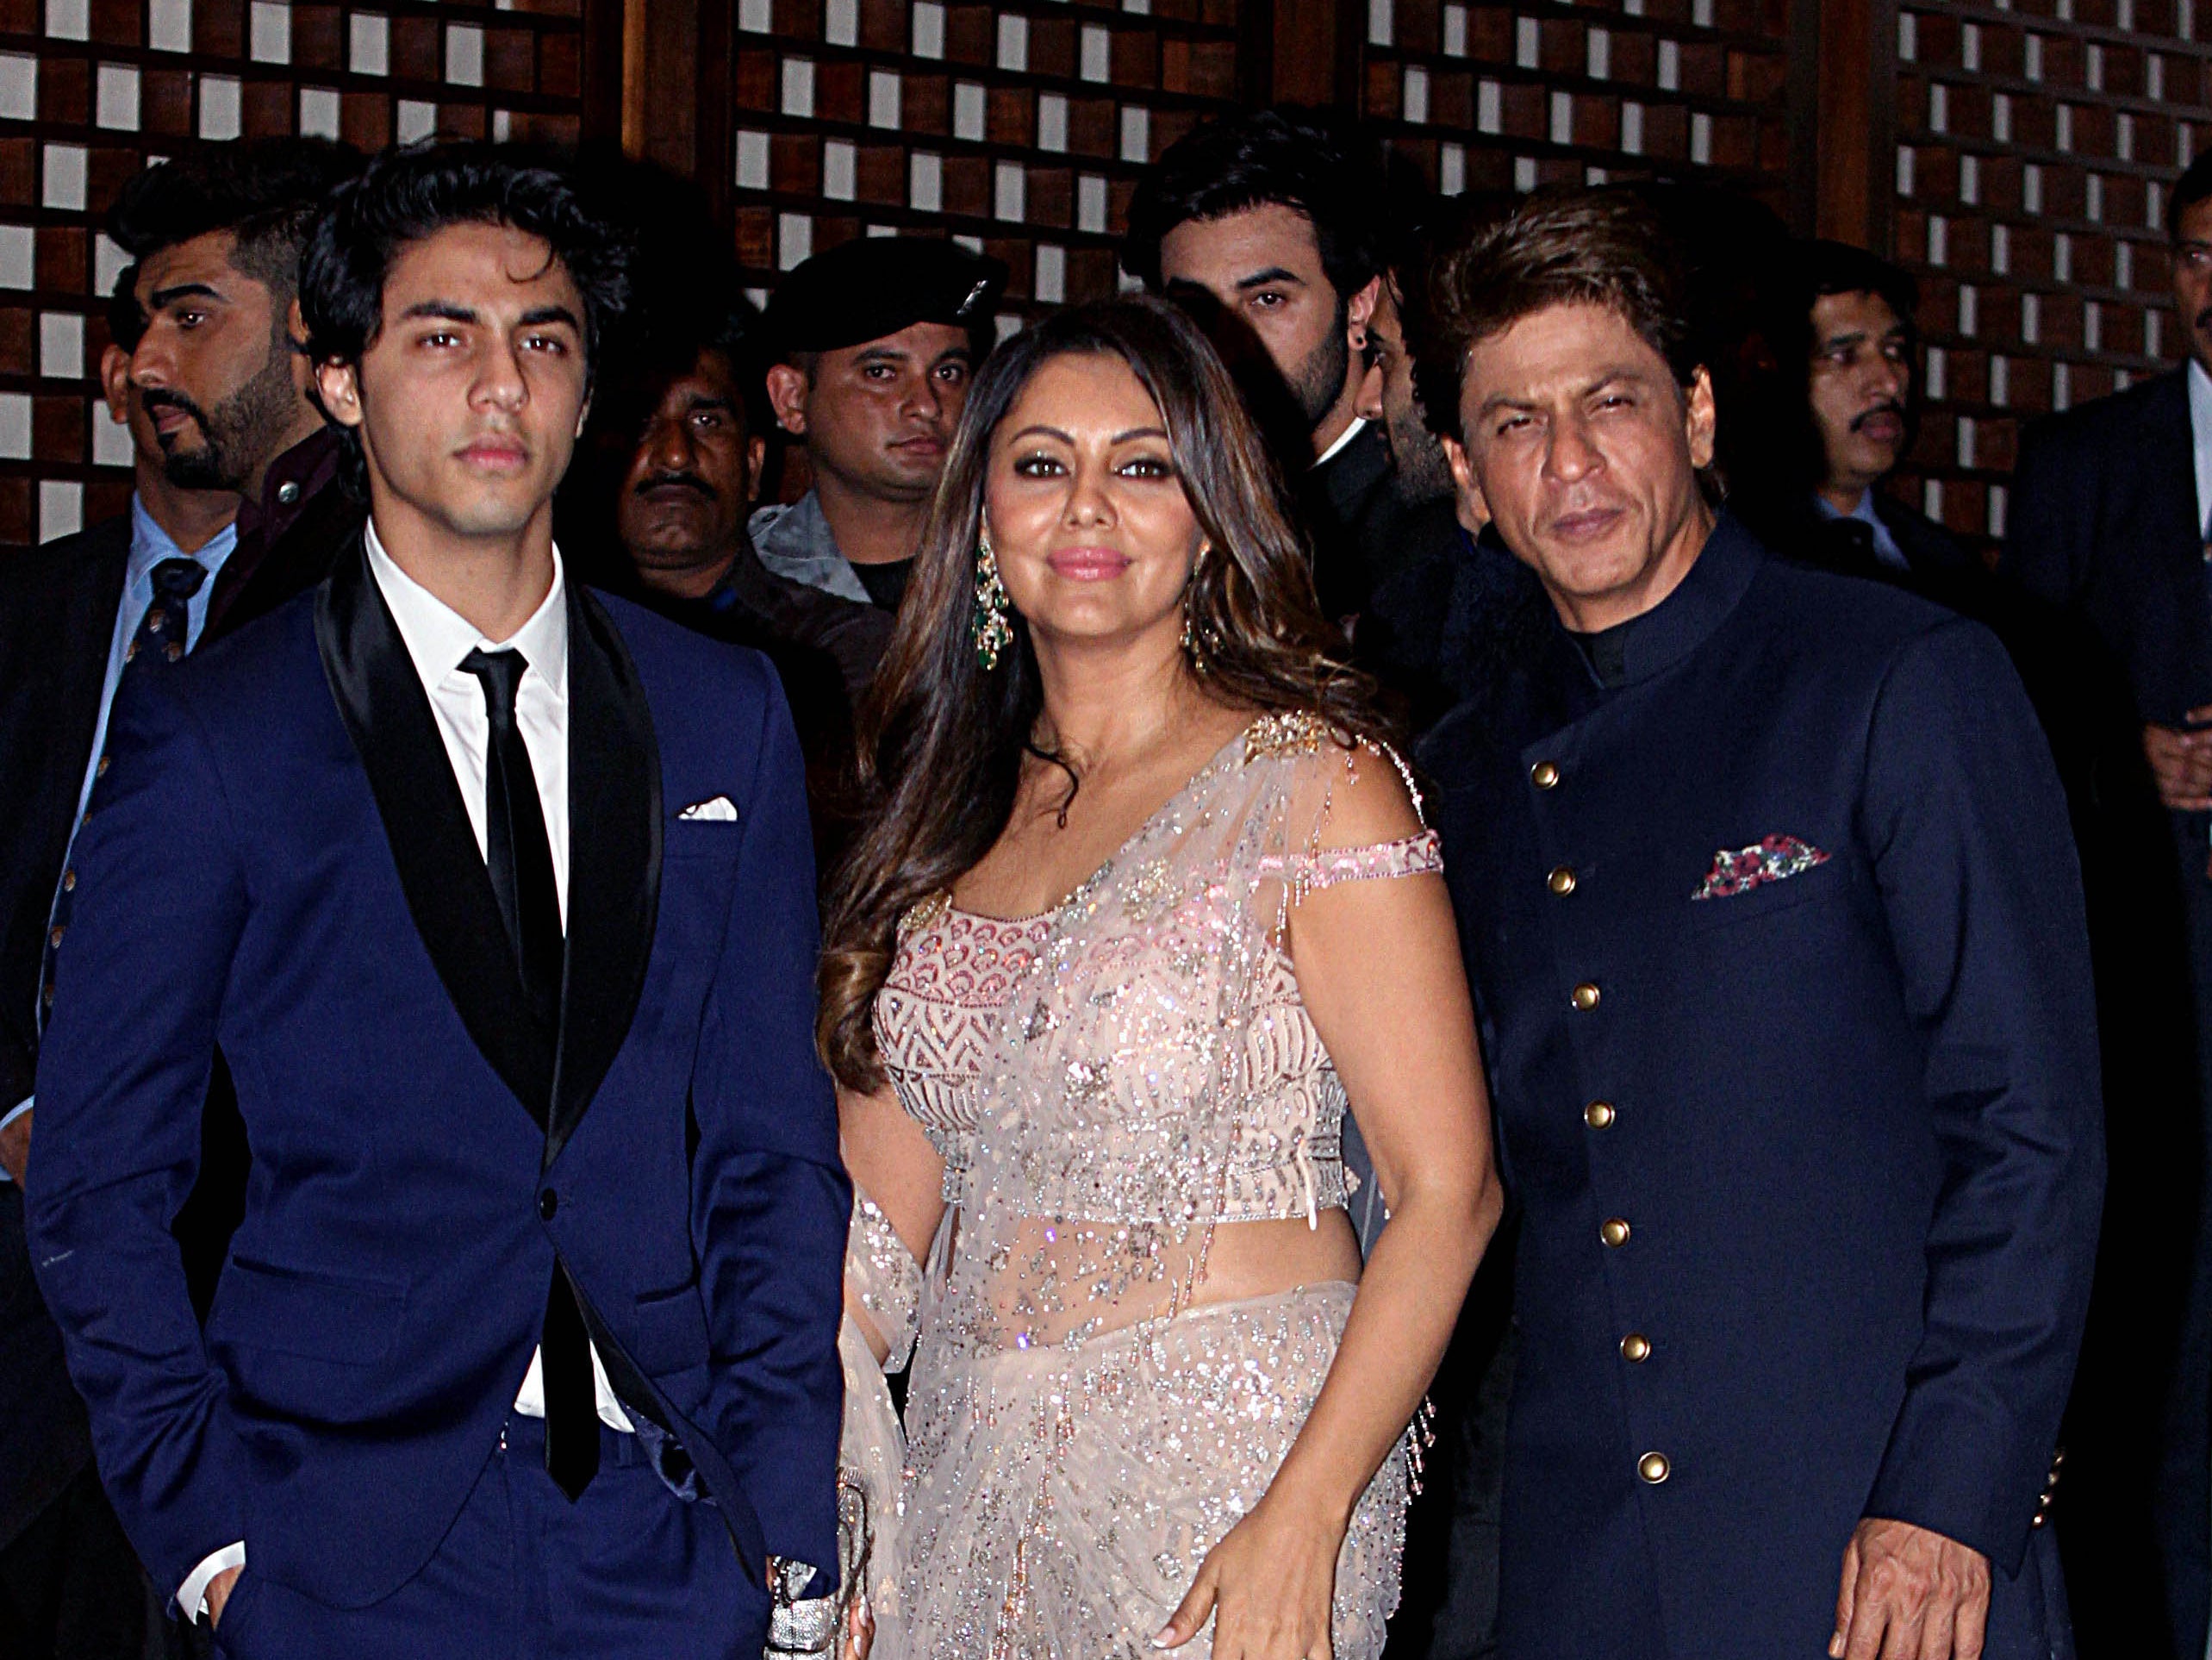 Indian Bollywood actor Shah Rukh Khan (R) poses for a picture with his wife Gauri Khan and son Aryan Khan (L).